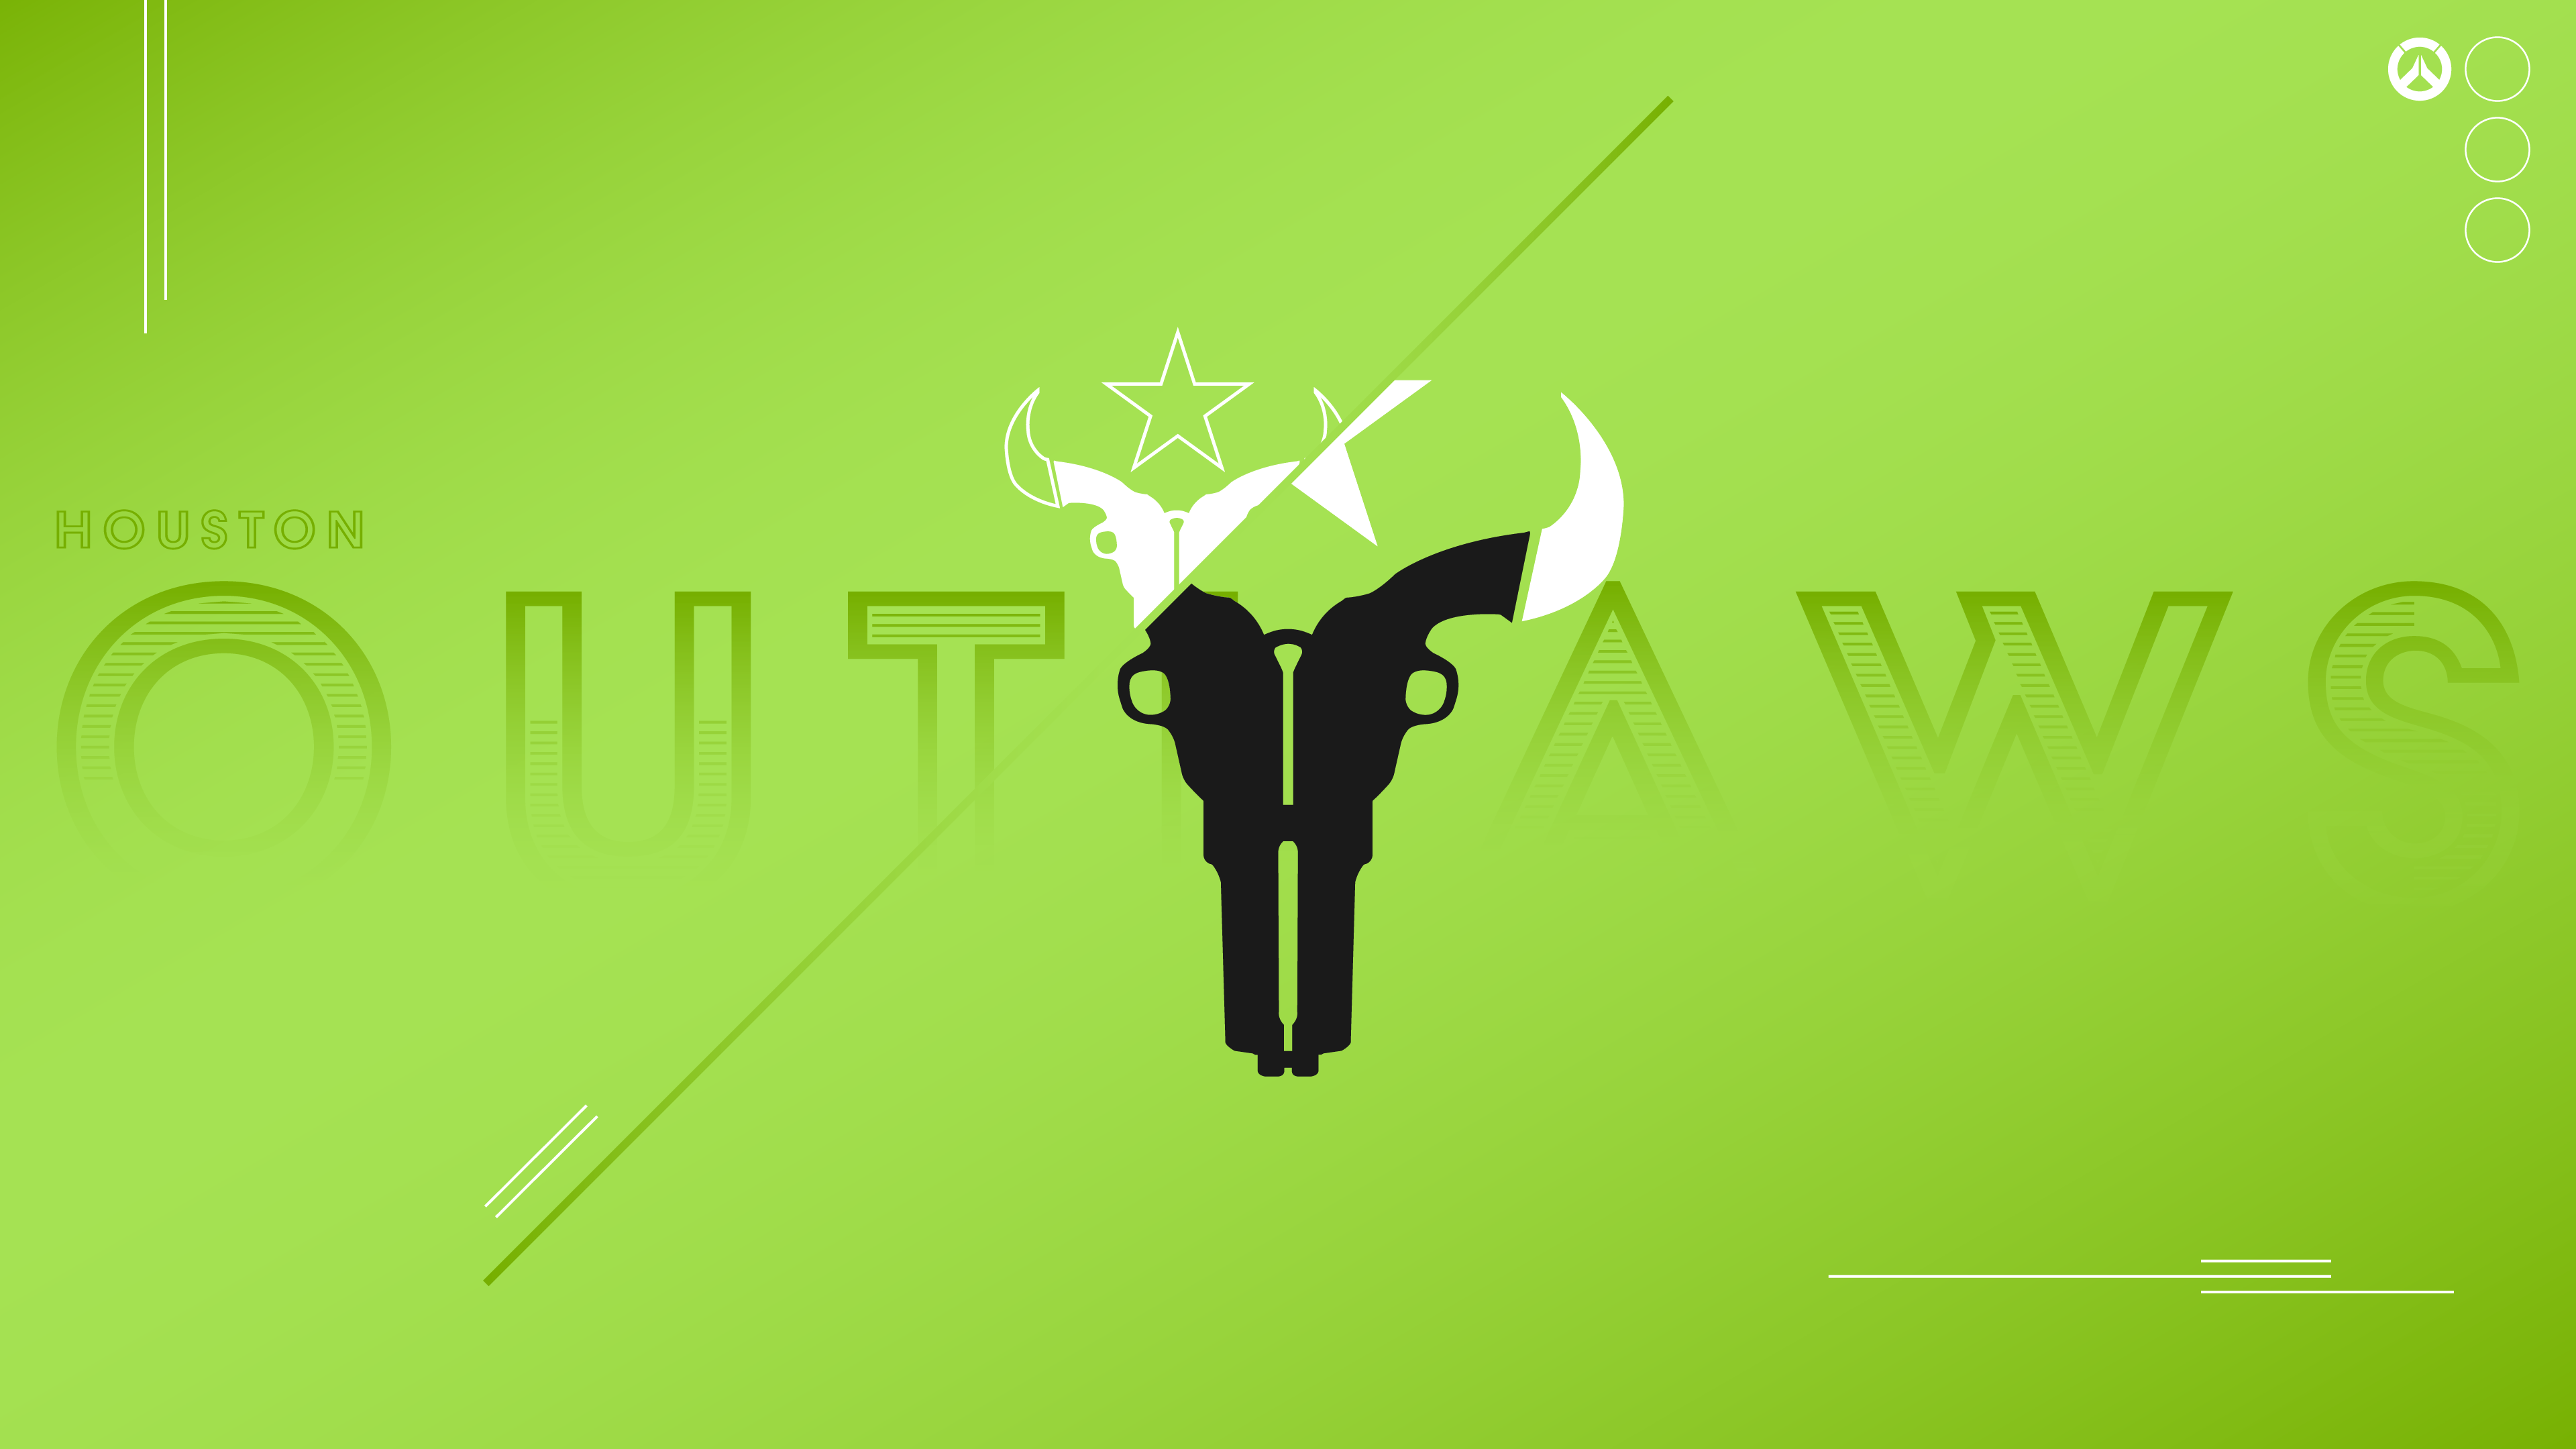 Outlaw Skull Cowboy Illustration Stock Vector by ©Milesthone 232950908